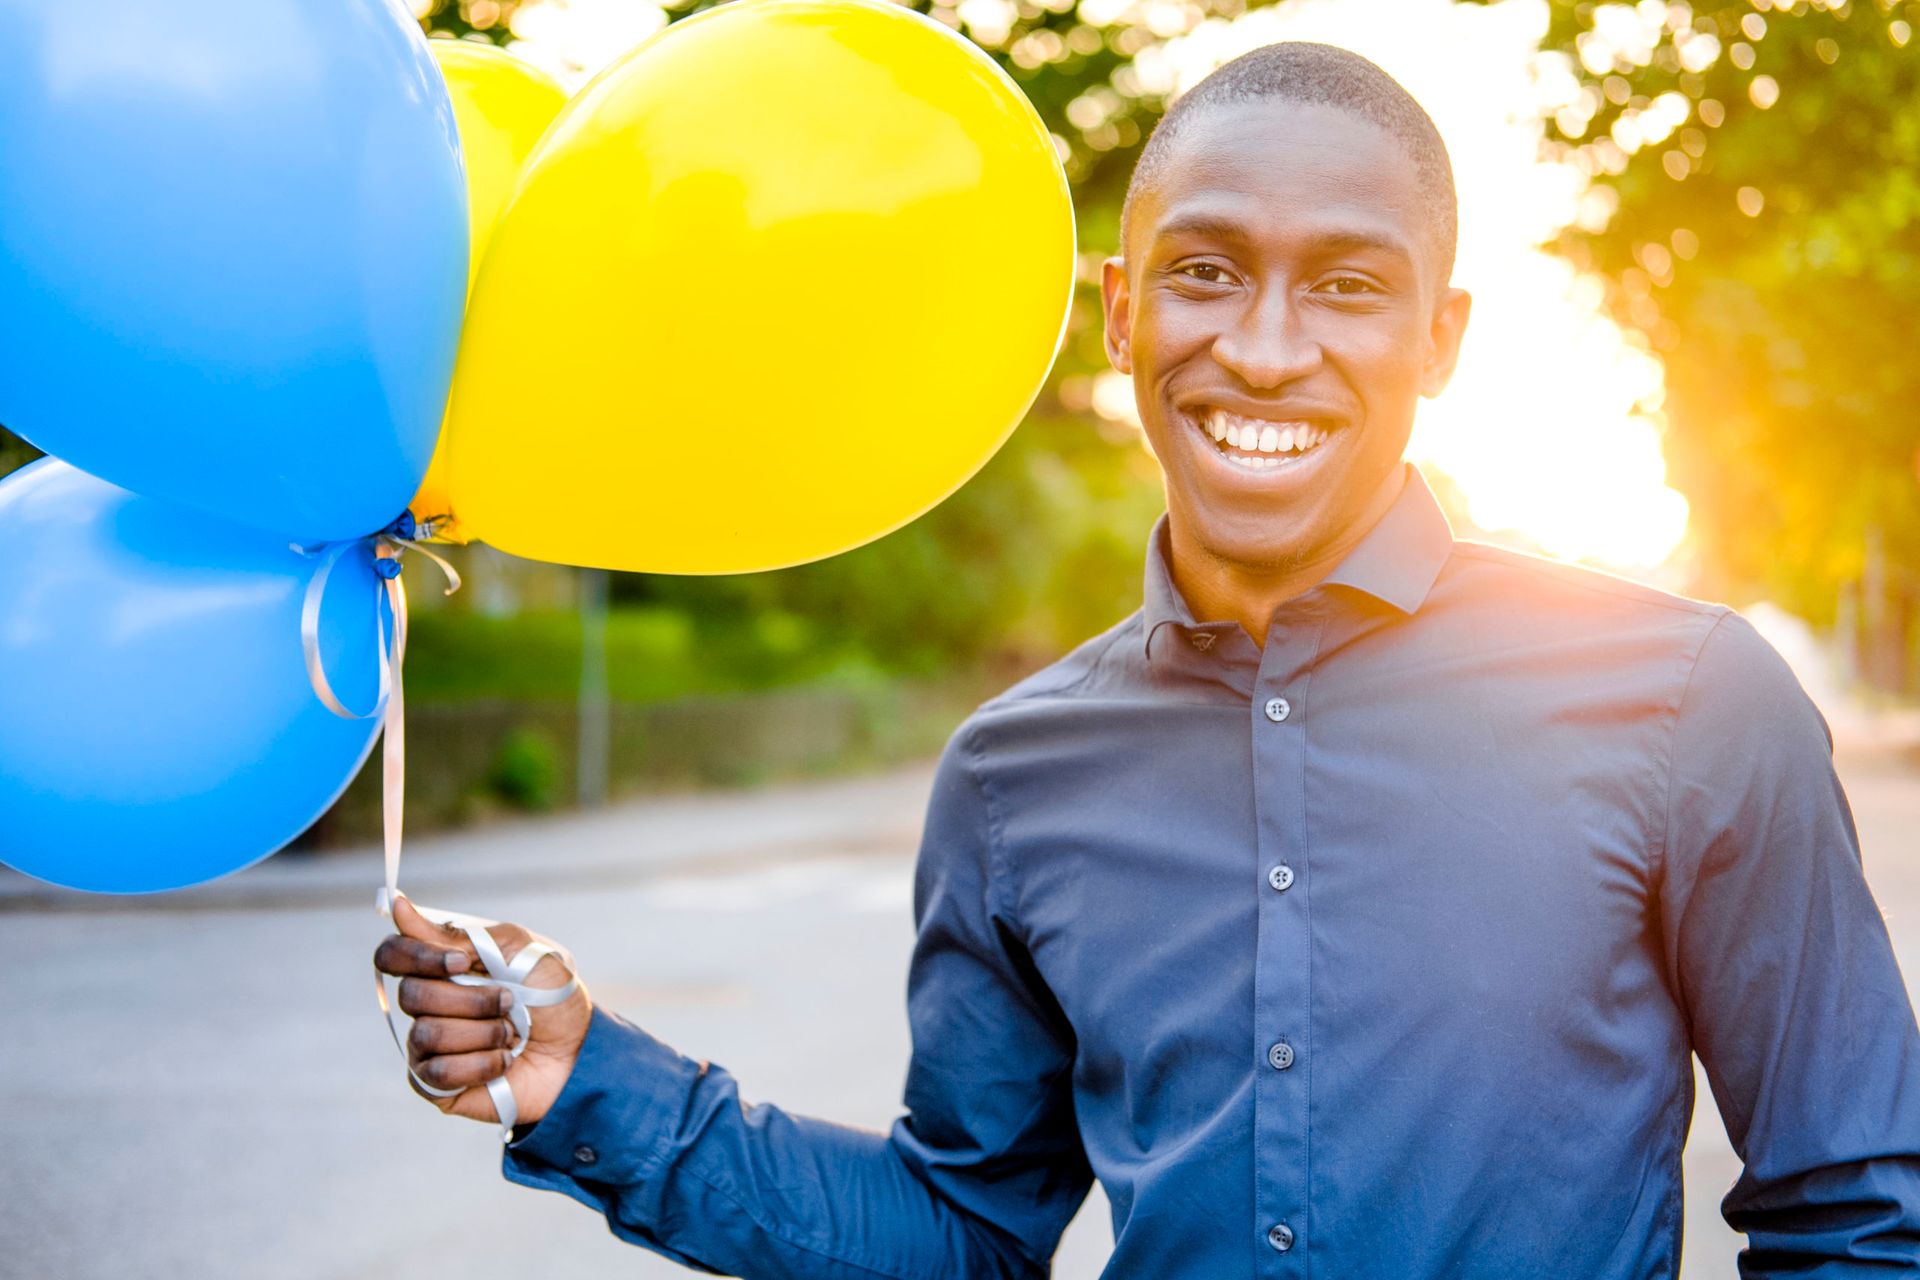 A male student holding balloons with the colors yellow and blue at the same time as he smiles into the camera.